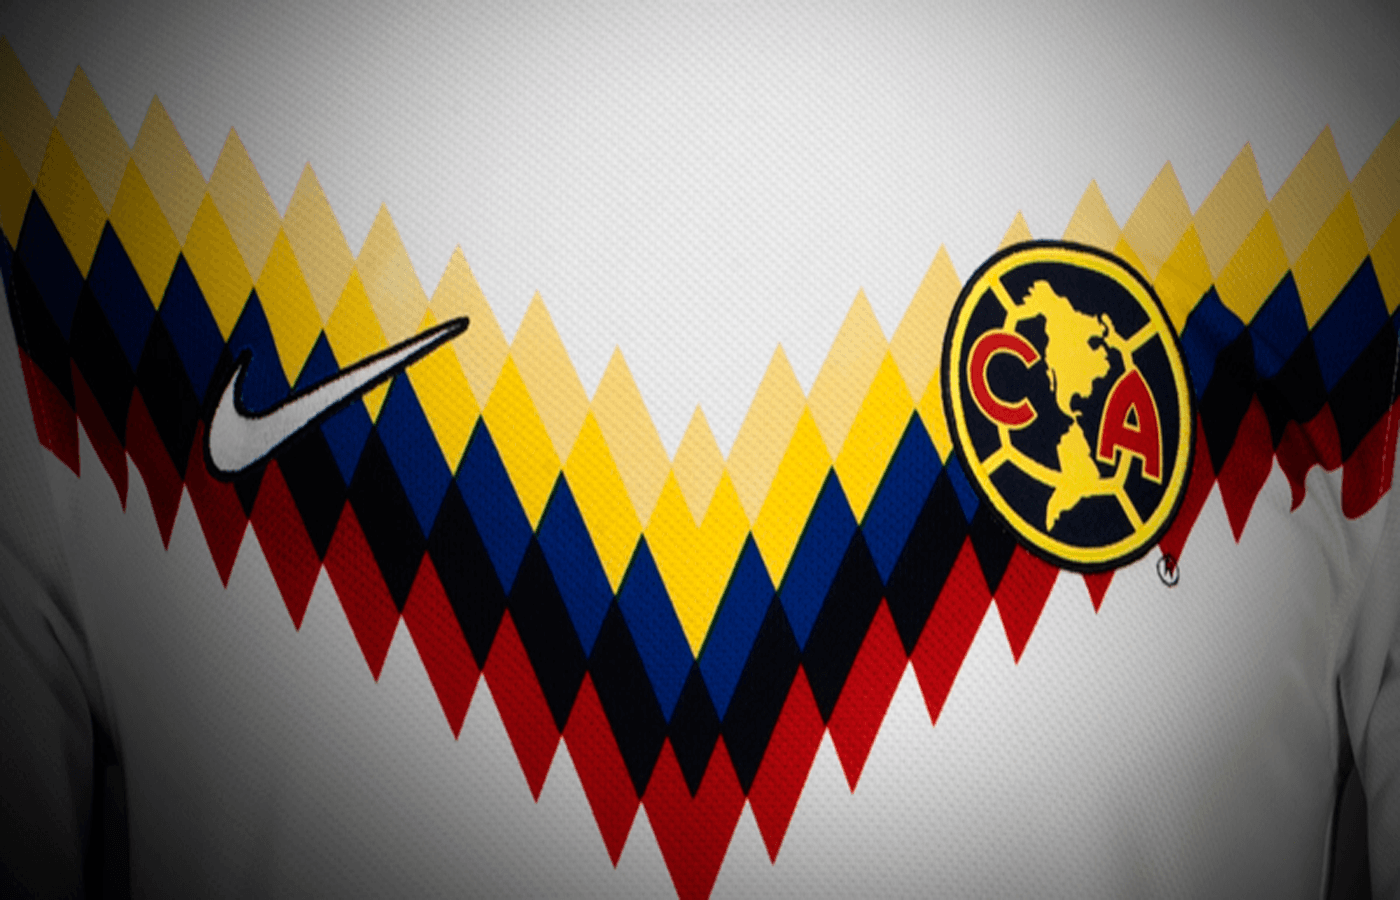 Club America wallpaper by ImagesINC  Download on ZEDGE  bb08